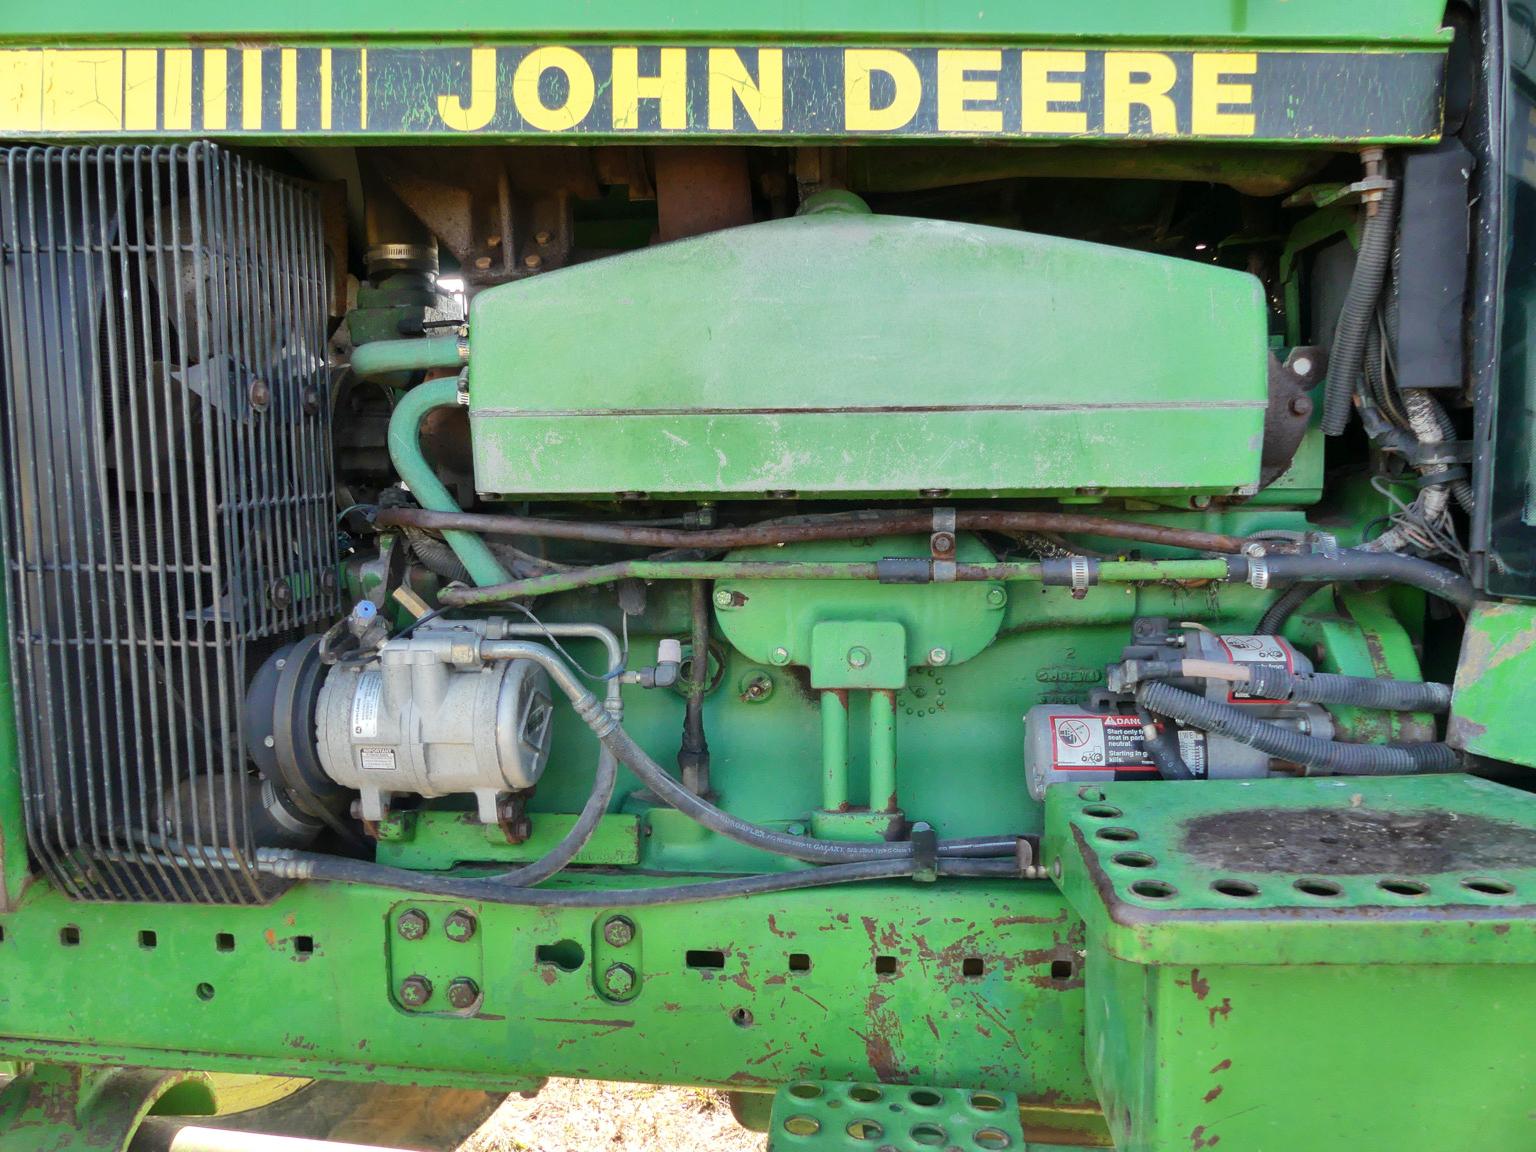 John Deere 4955 MFWD Tractor, s/n RW4955P007344: C/A, Rear Duals, Front Wei